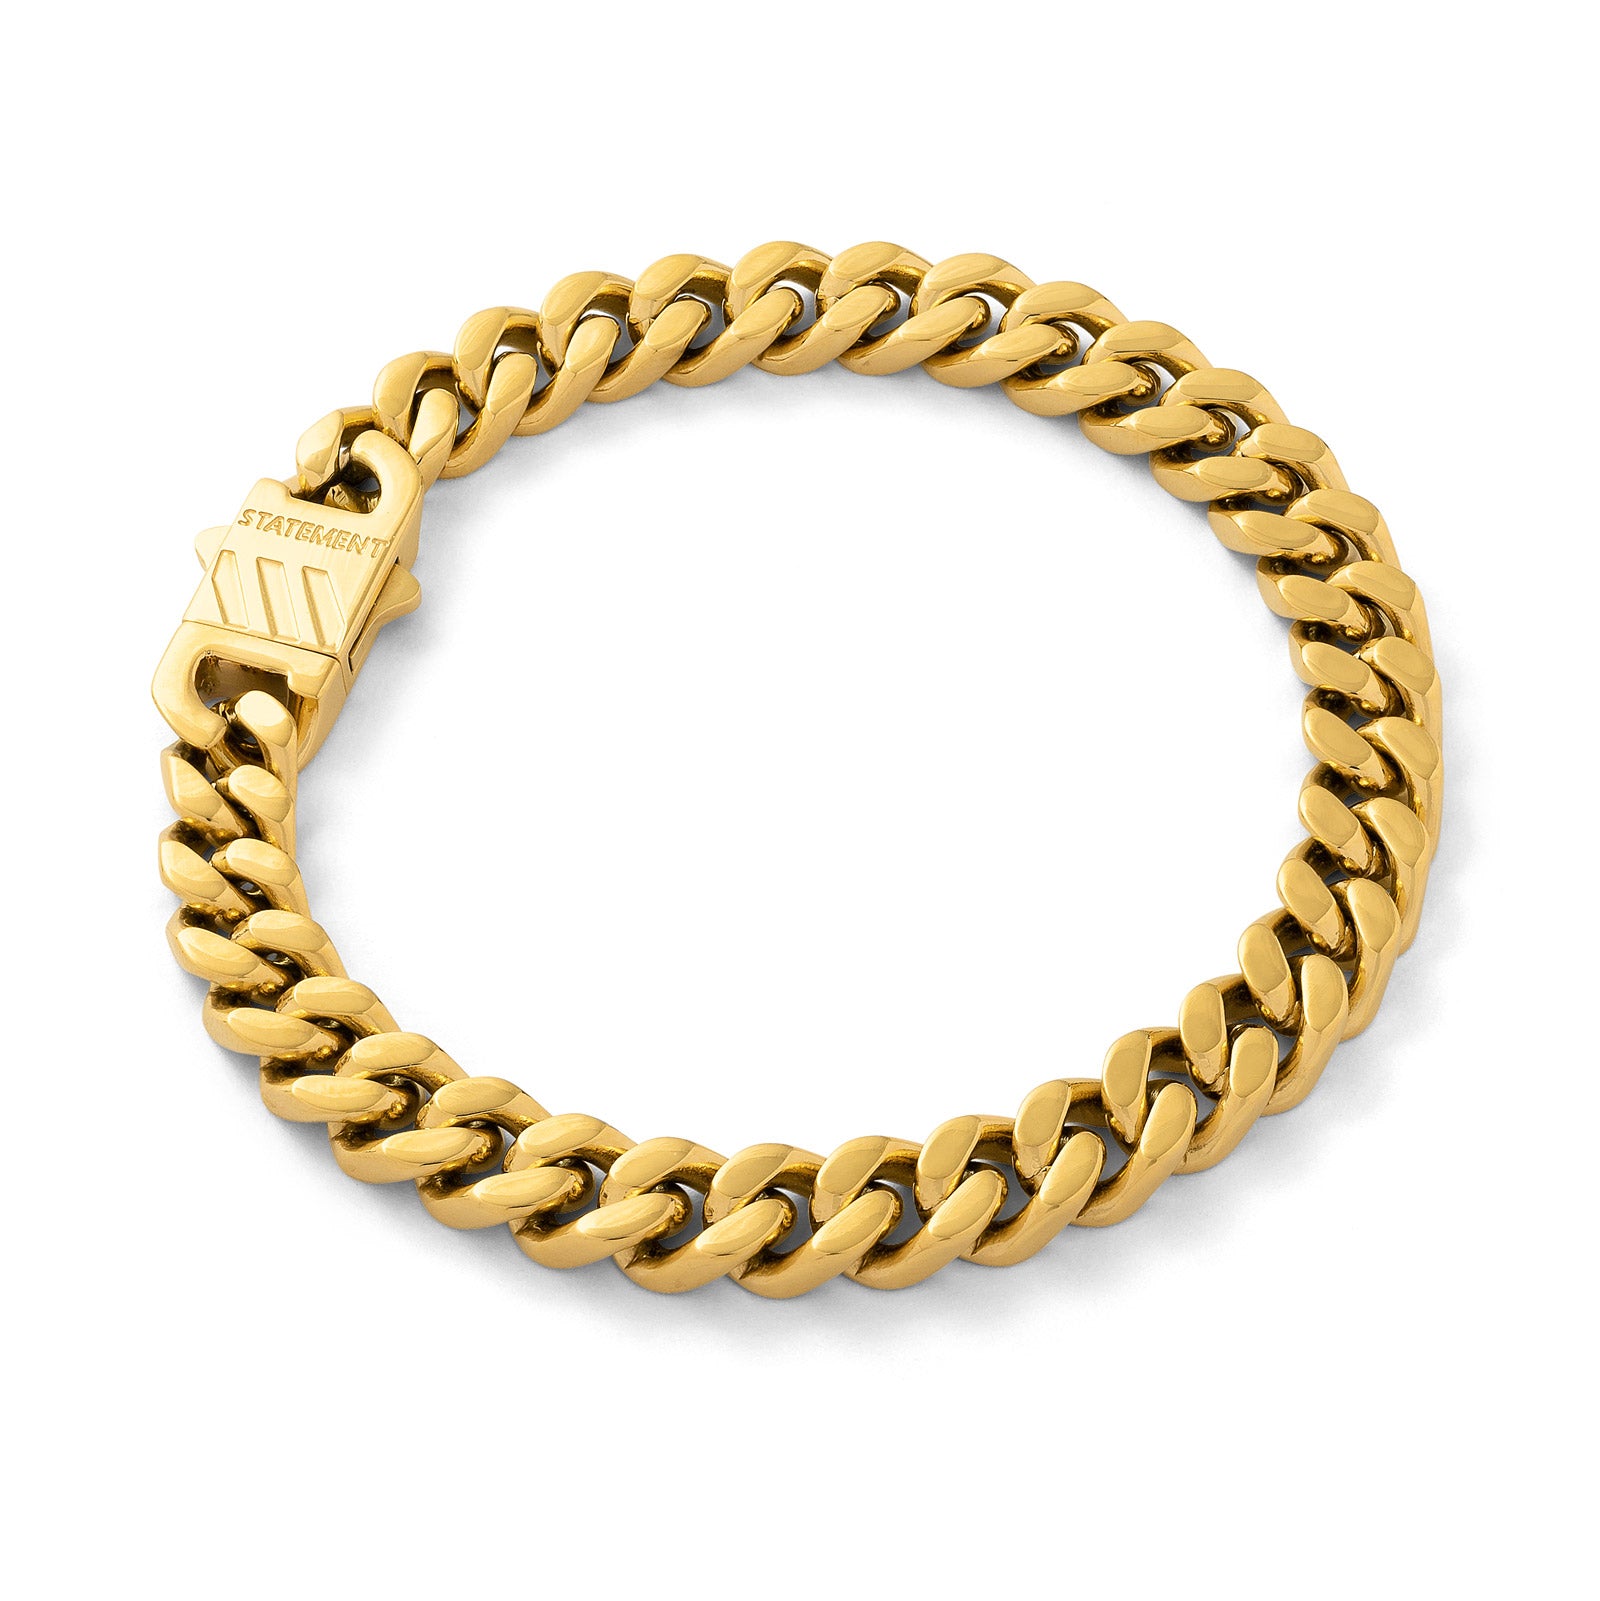 Expertly Crafted Guide to Shop Cuban Link Bracelets